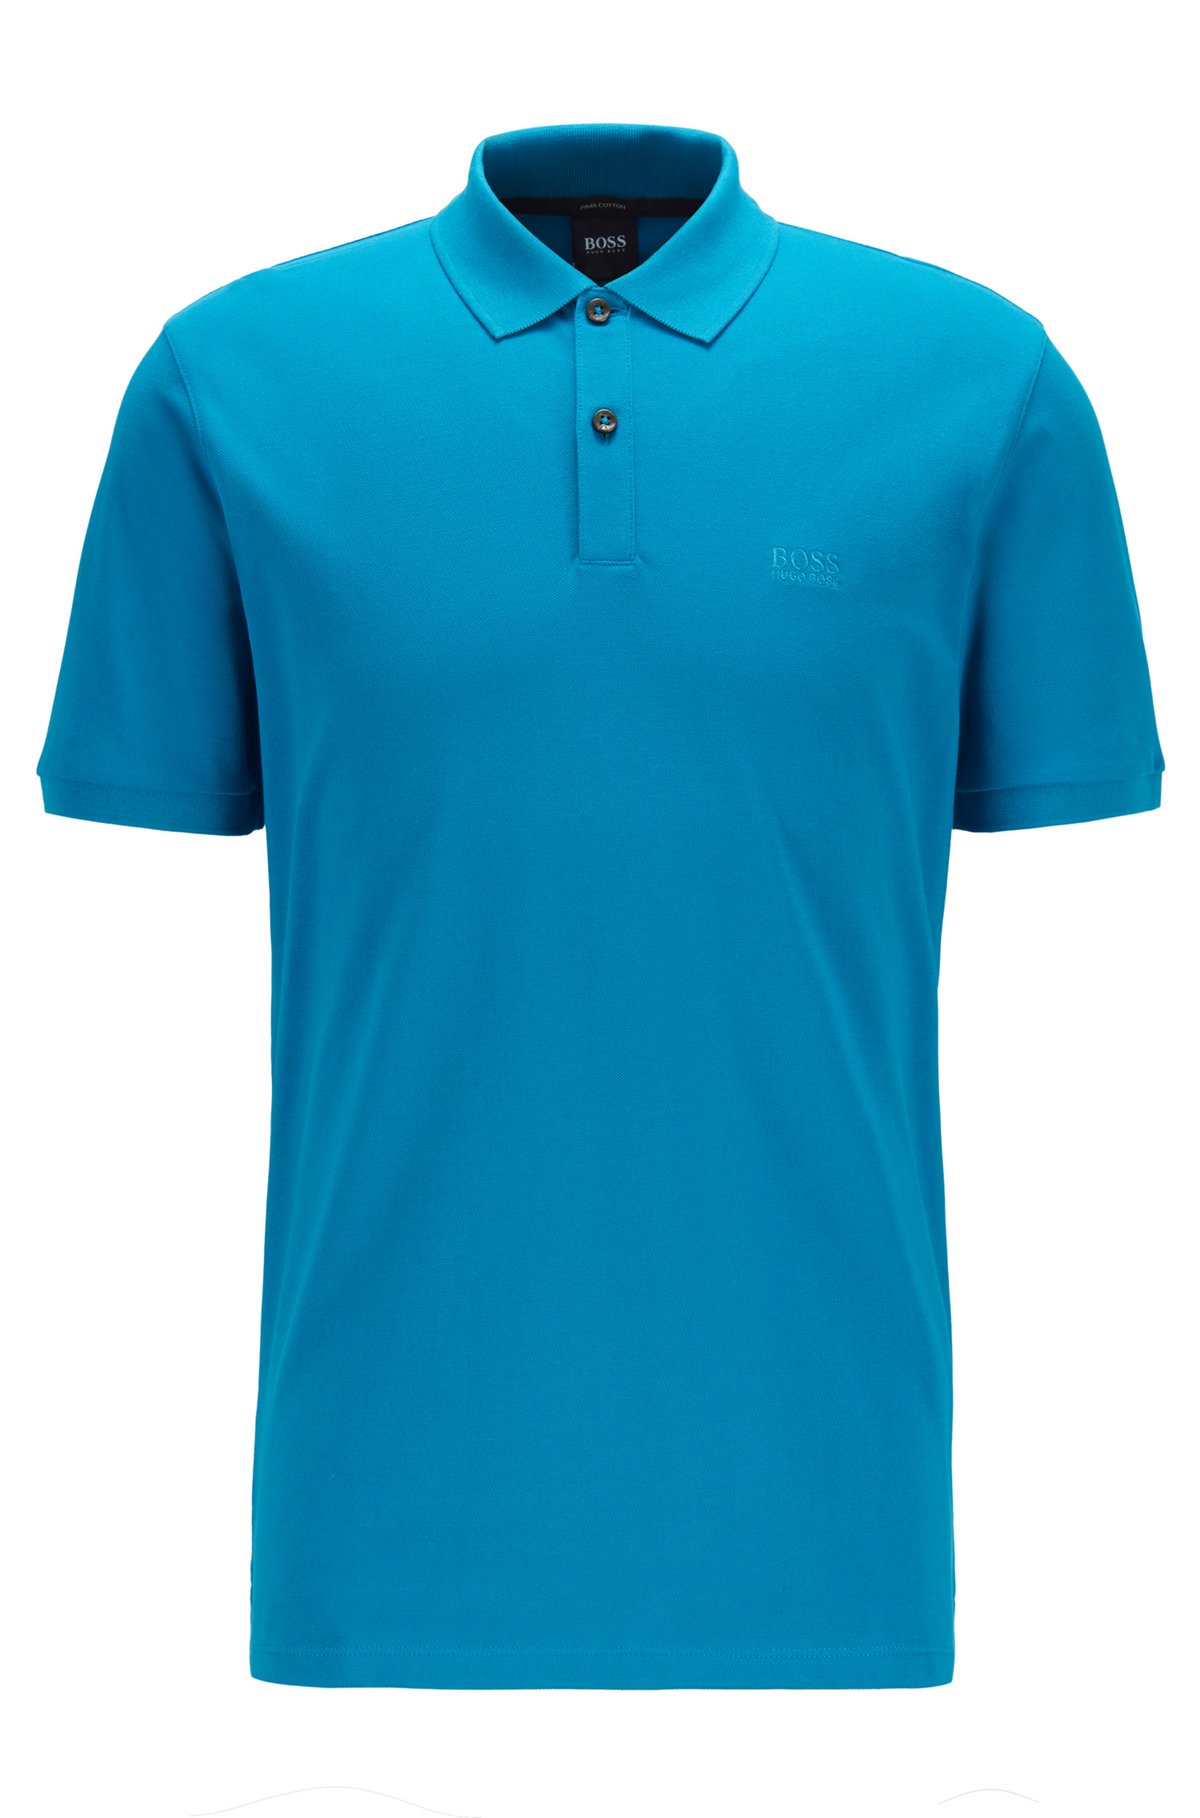 Regular-fit polo shirt in Pima-cotton piqué, Turquoise